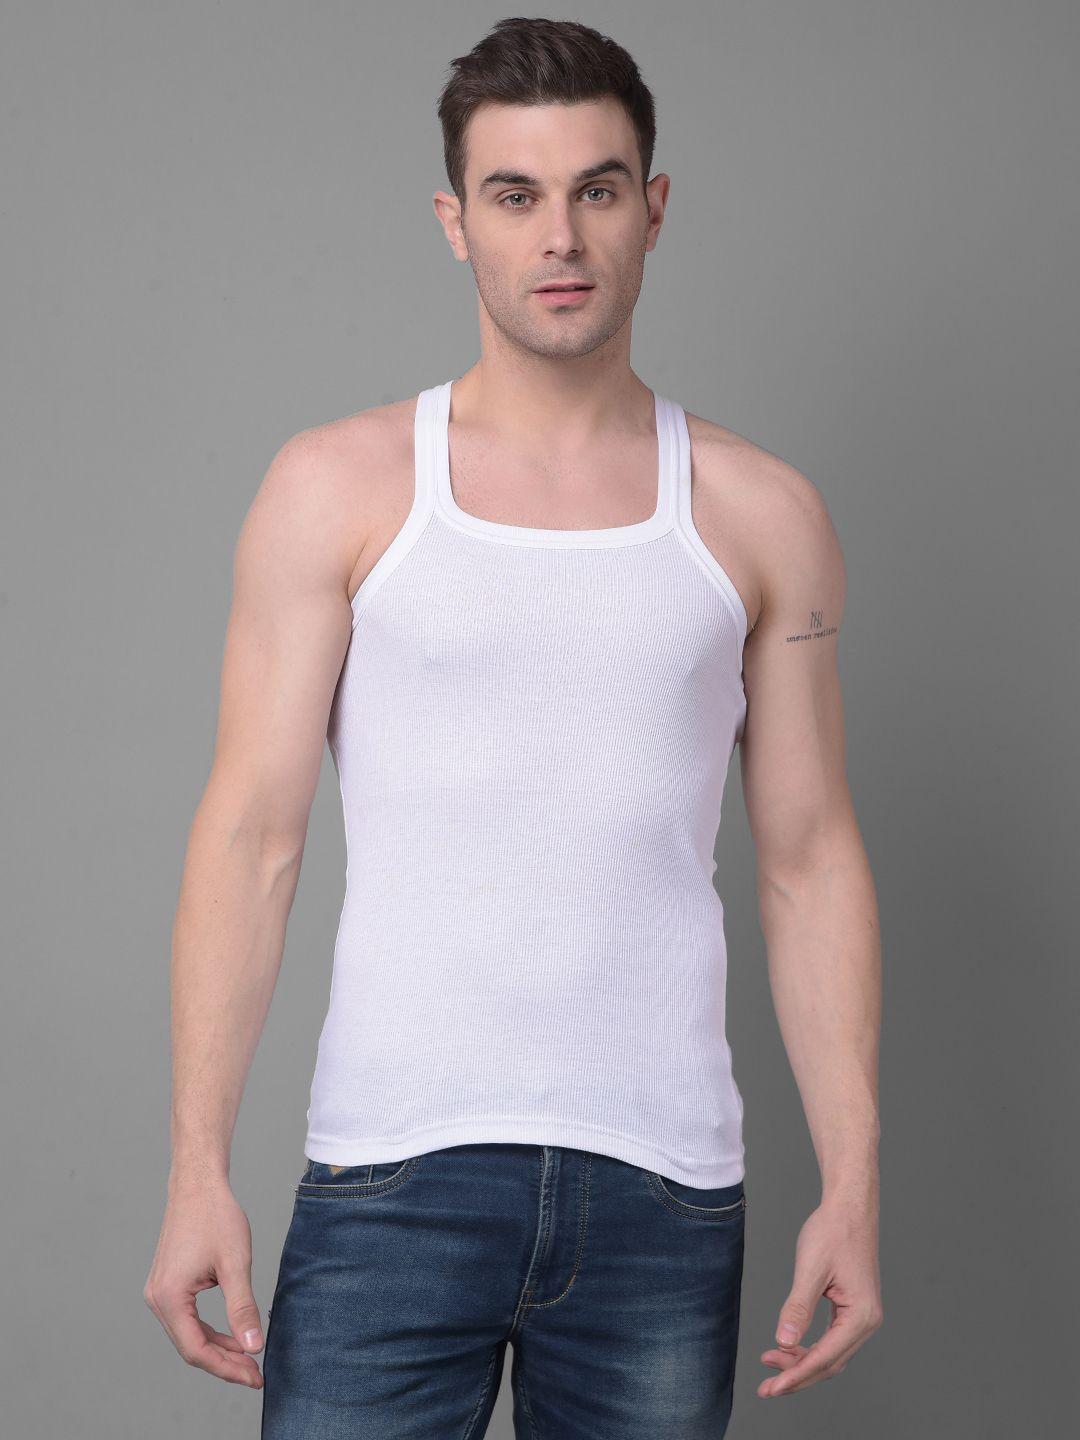 dollar bigboss ribbed racerback assorted cotton gym vests mbb-01-po1-co5-s24